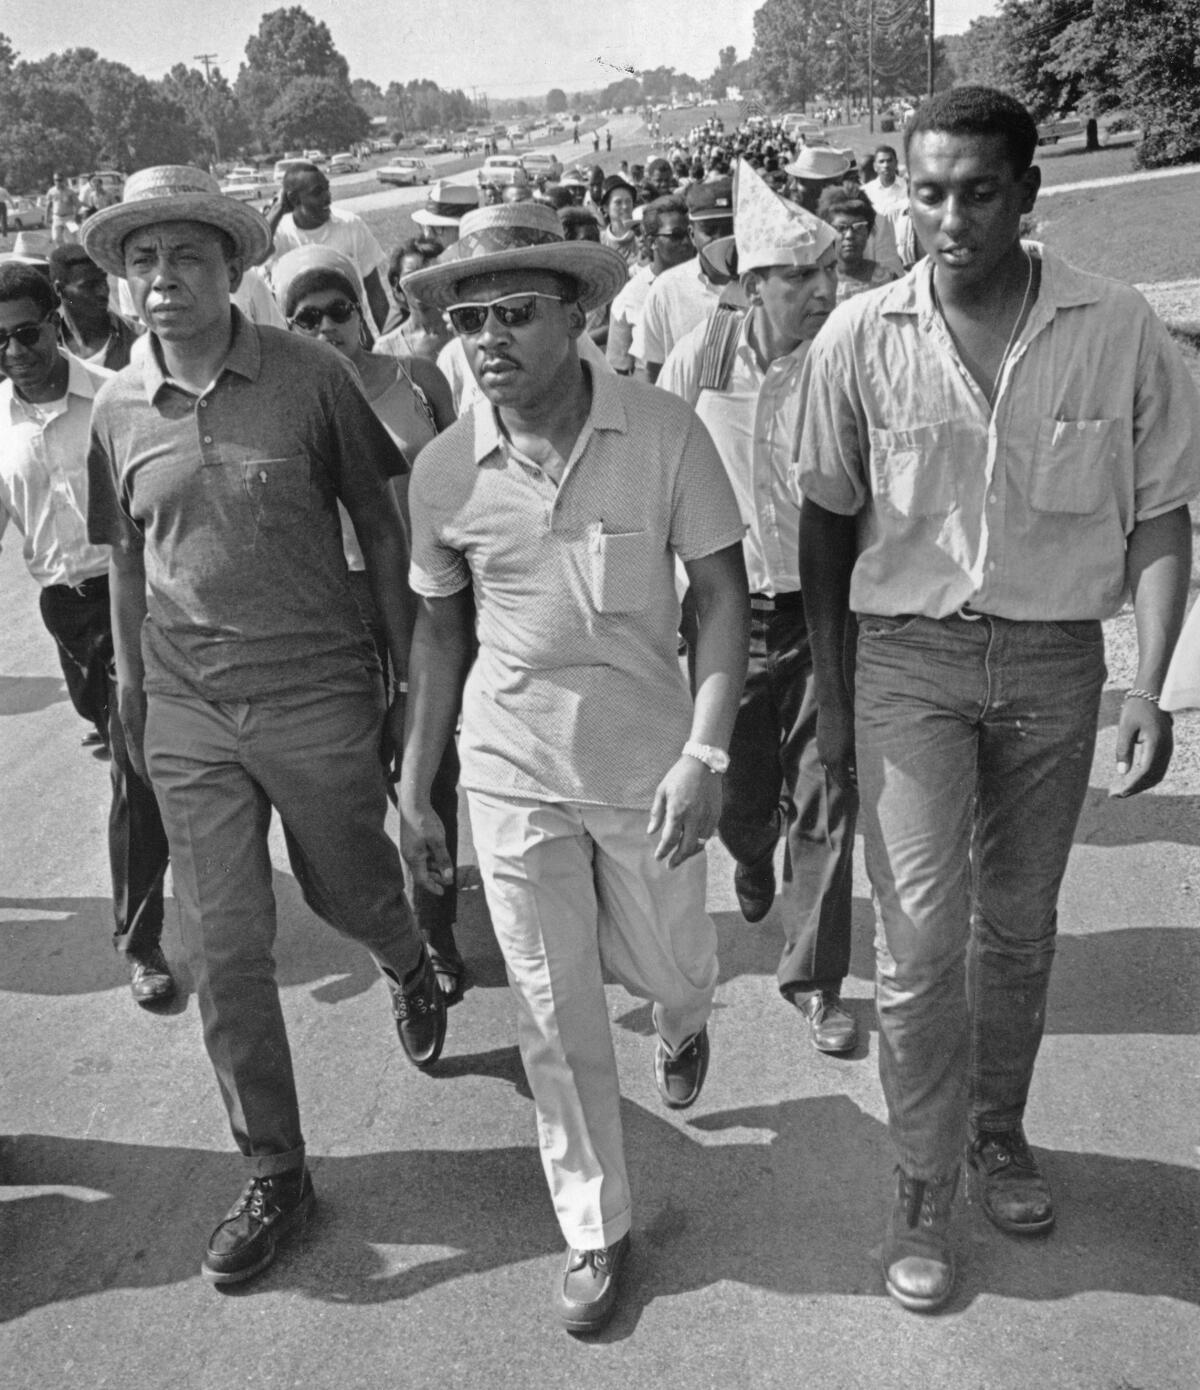 Three men wearing hats, leading a large march.